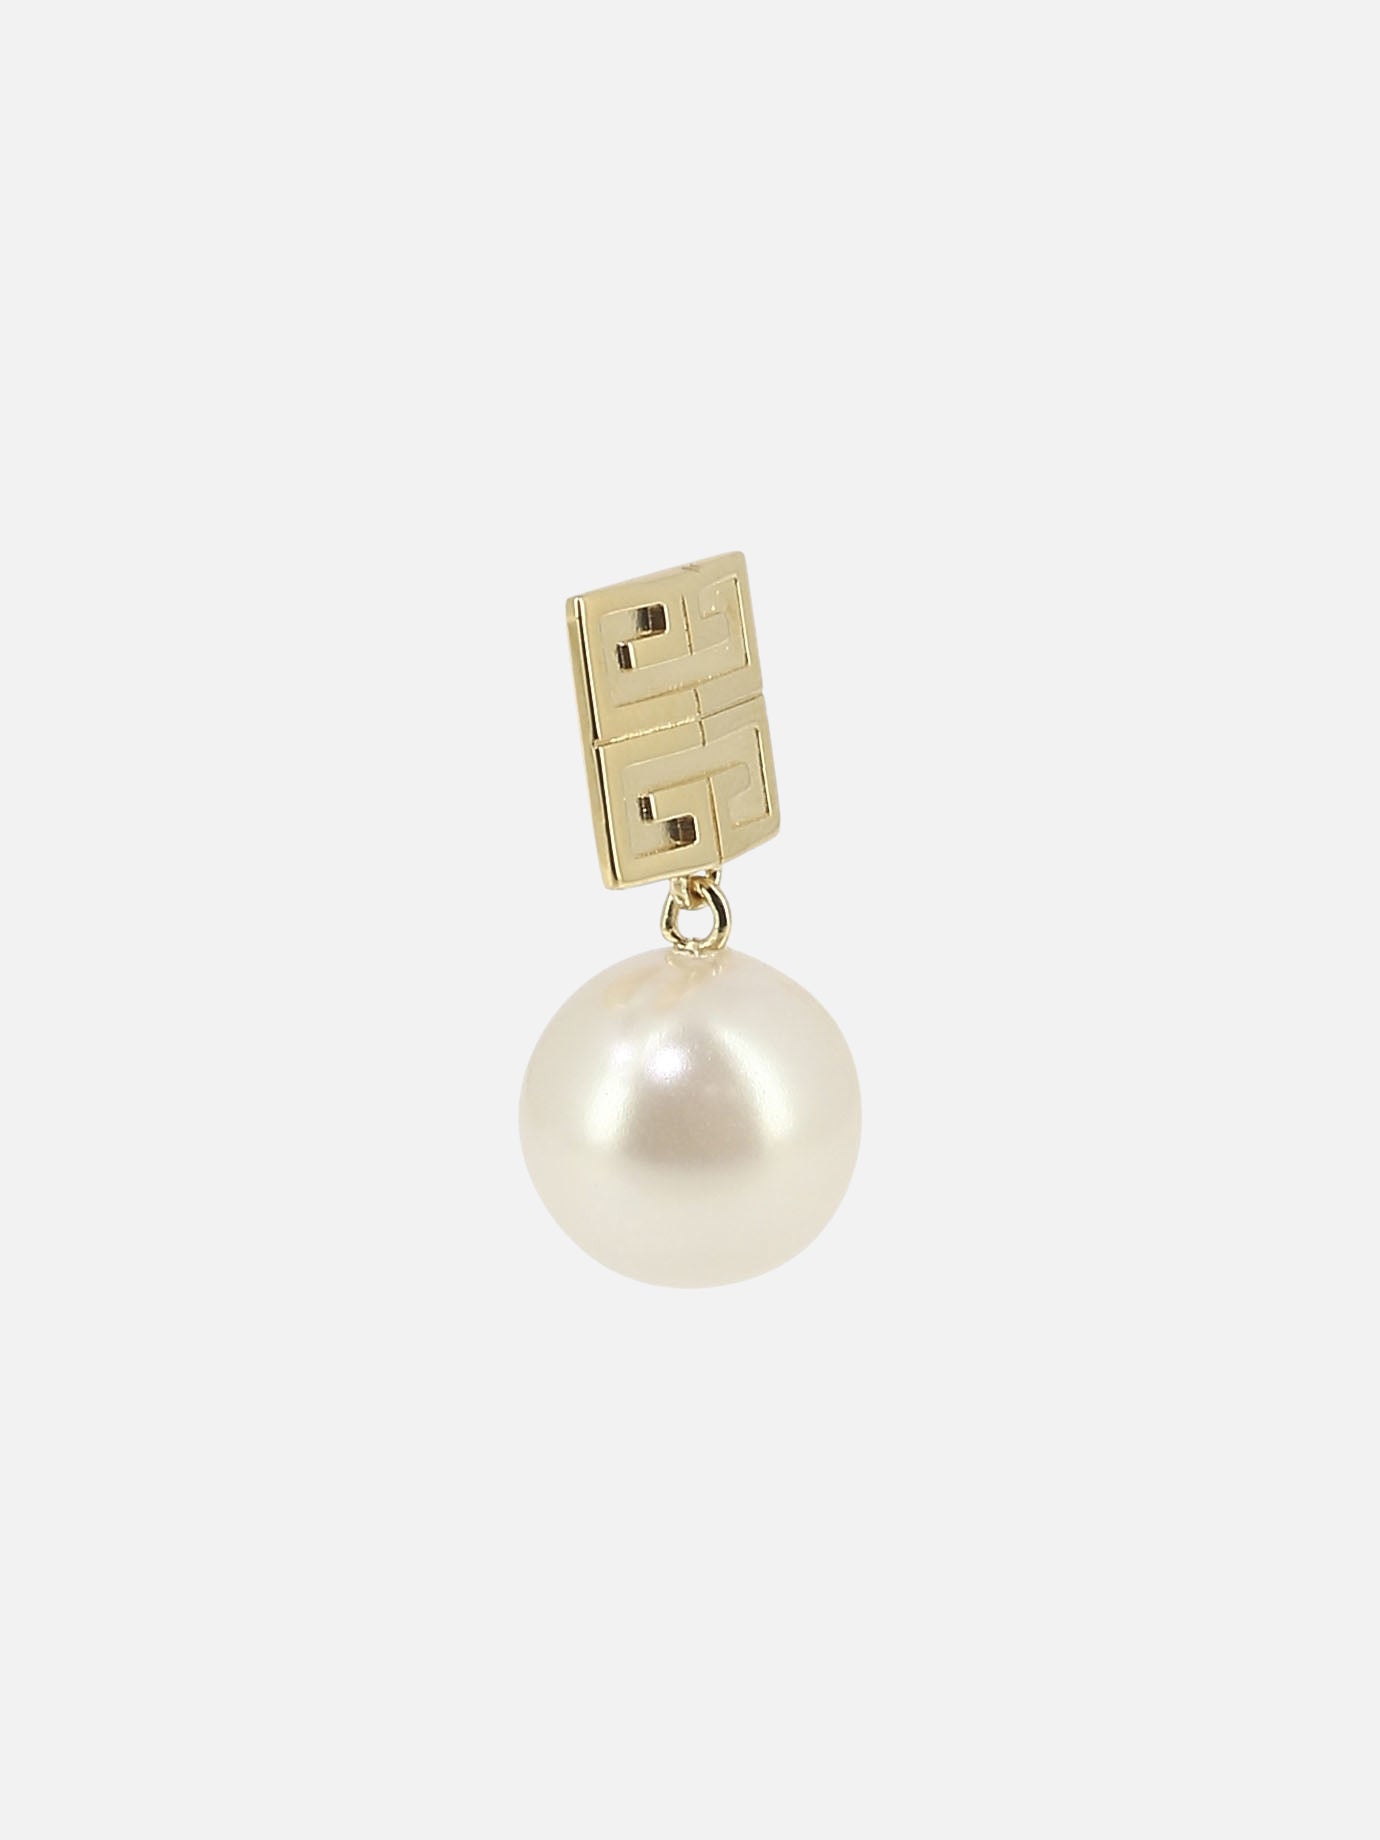 4G earrings with pearls